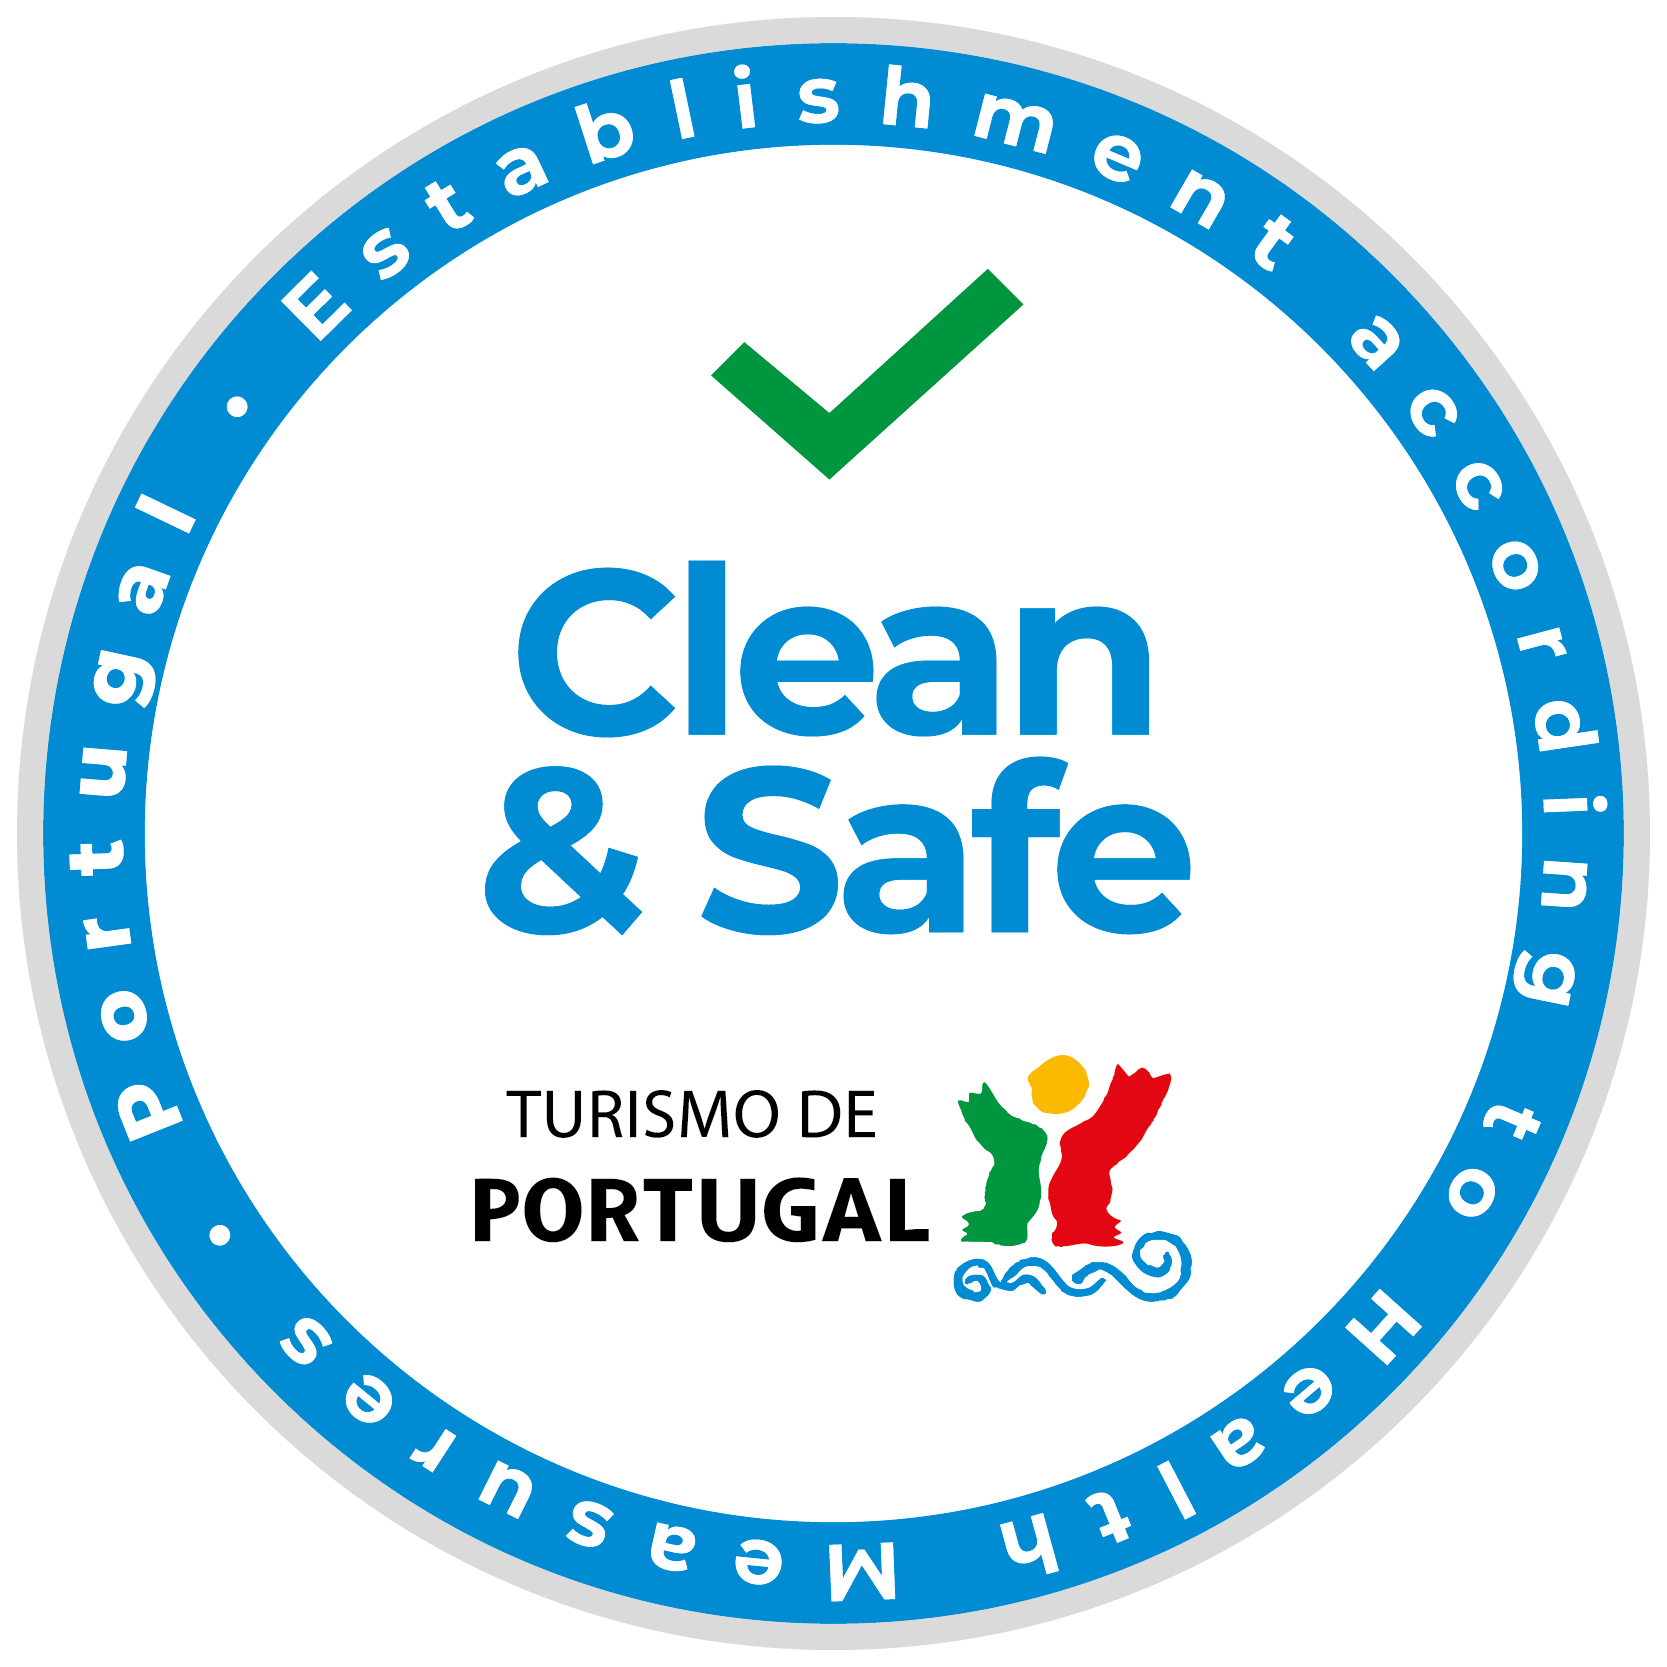 health and safety commitment badge for Portugal experiences